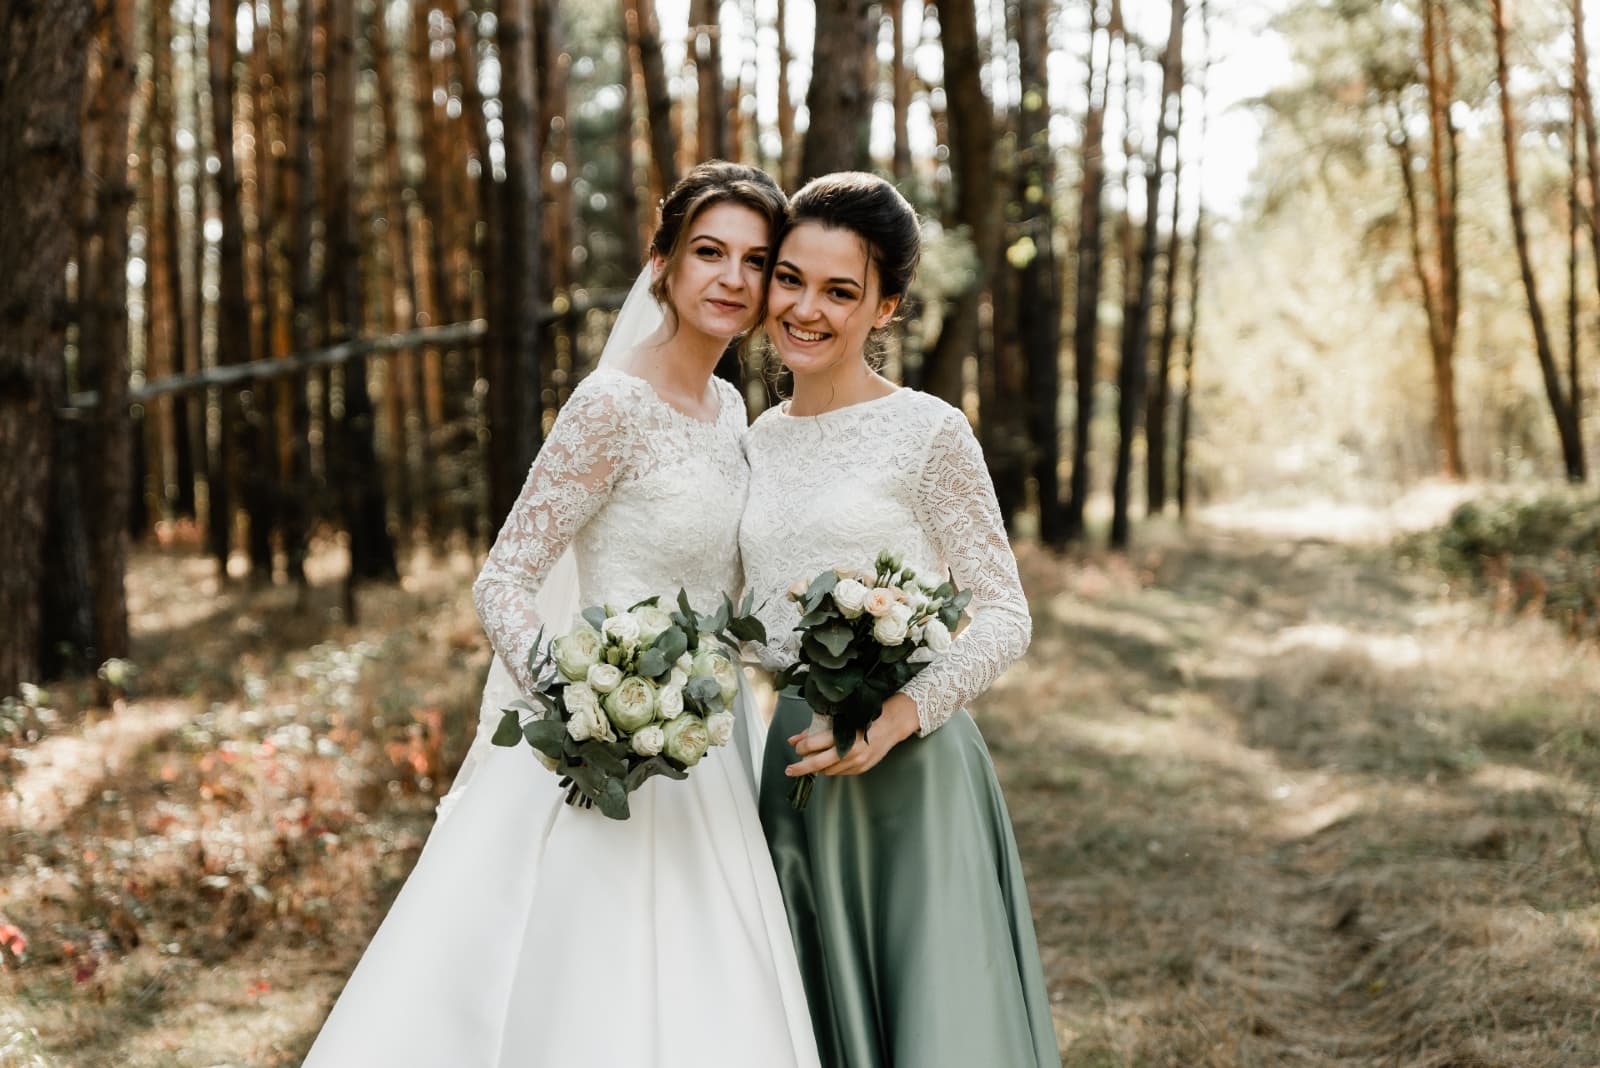 bride and bridesmaid with bouquet of flowers standing in forest